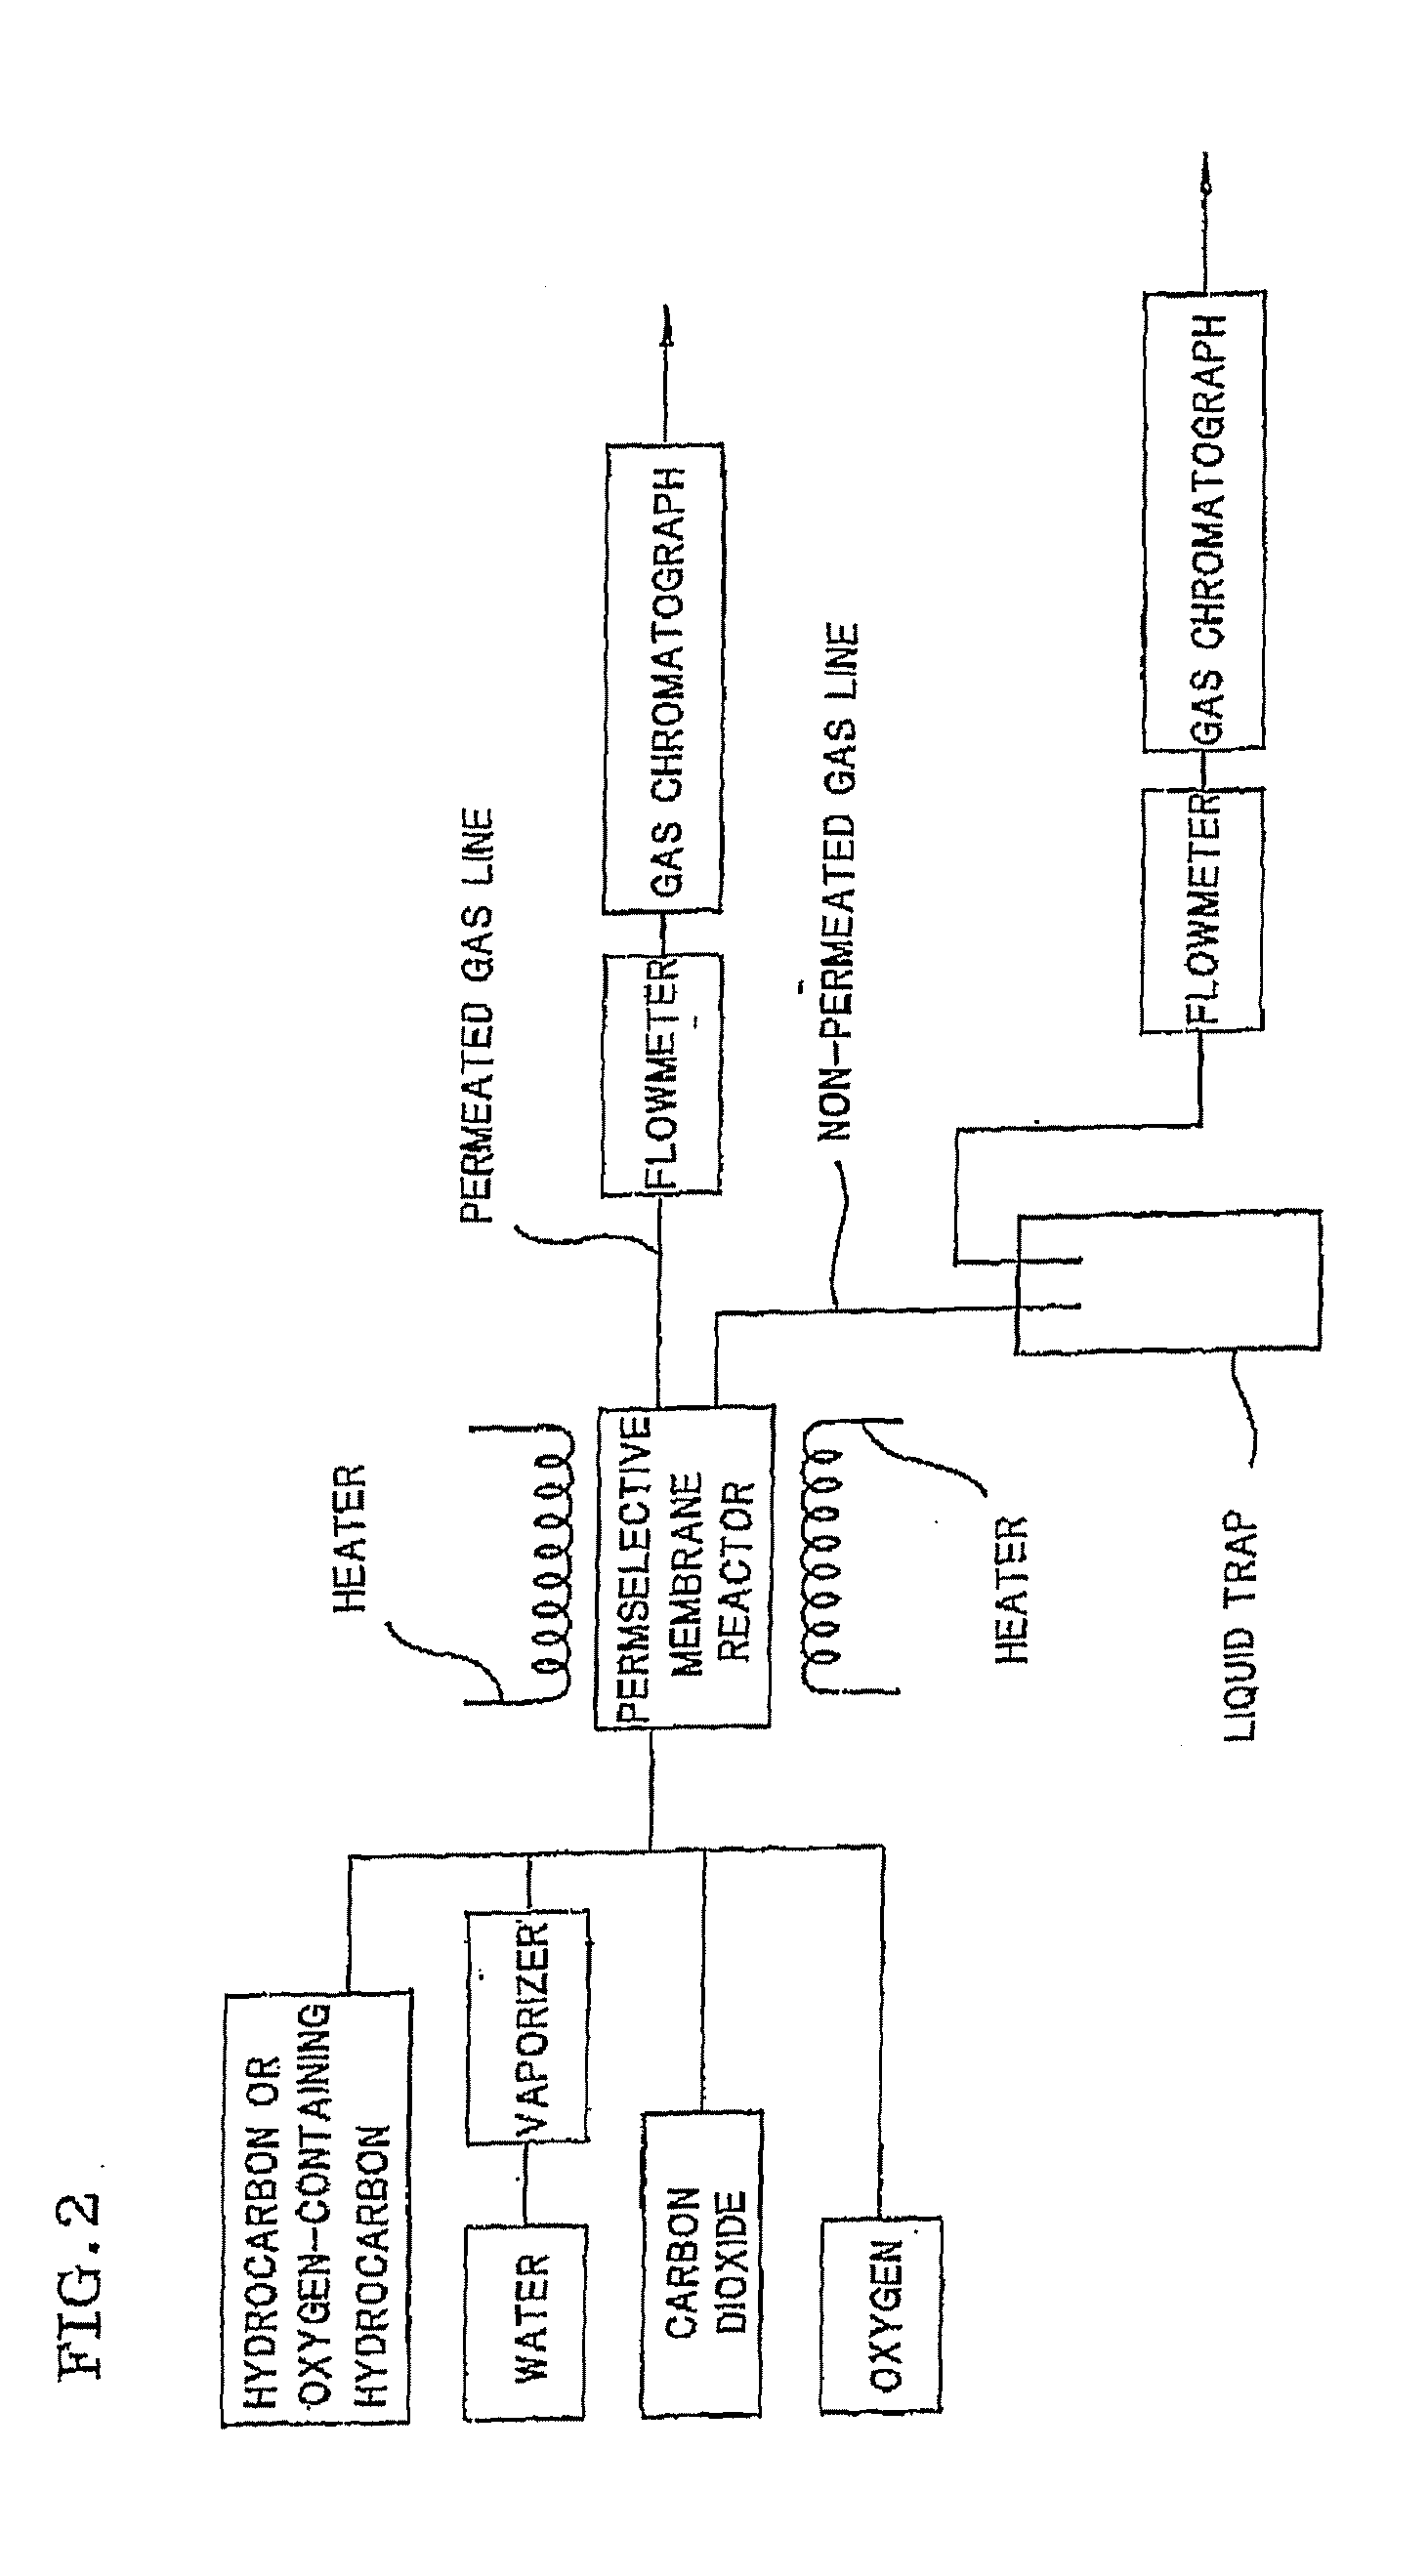 Process for producing hydrogen with permselective membrane reactor and permselective membrane reactor